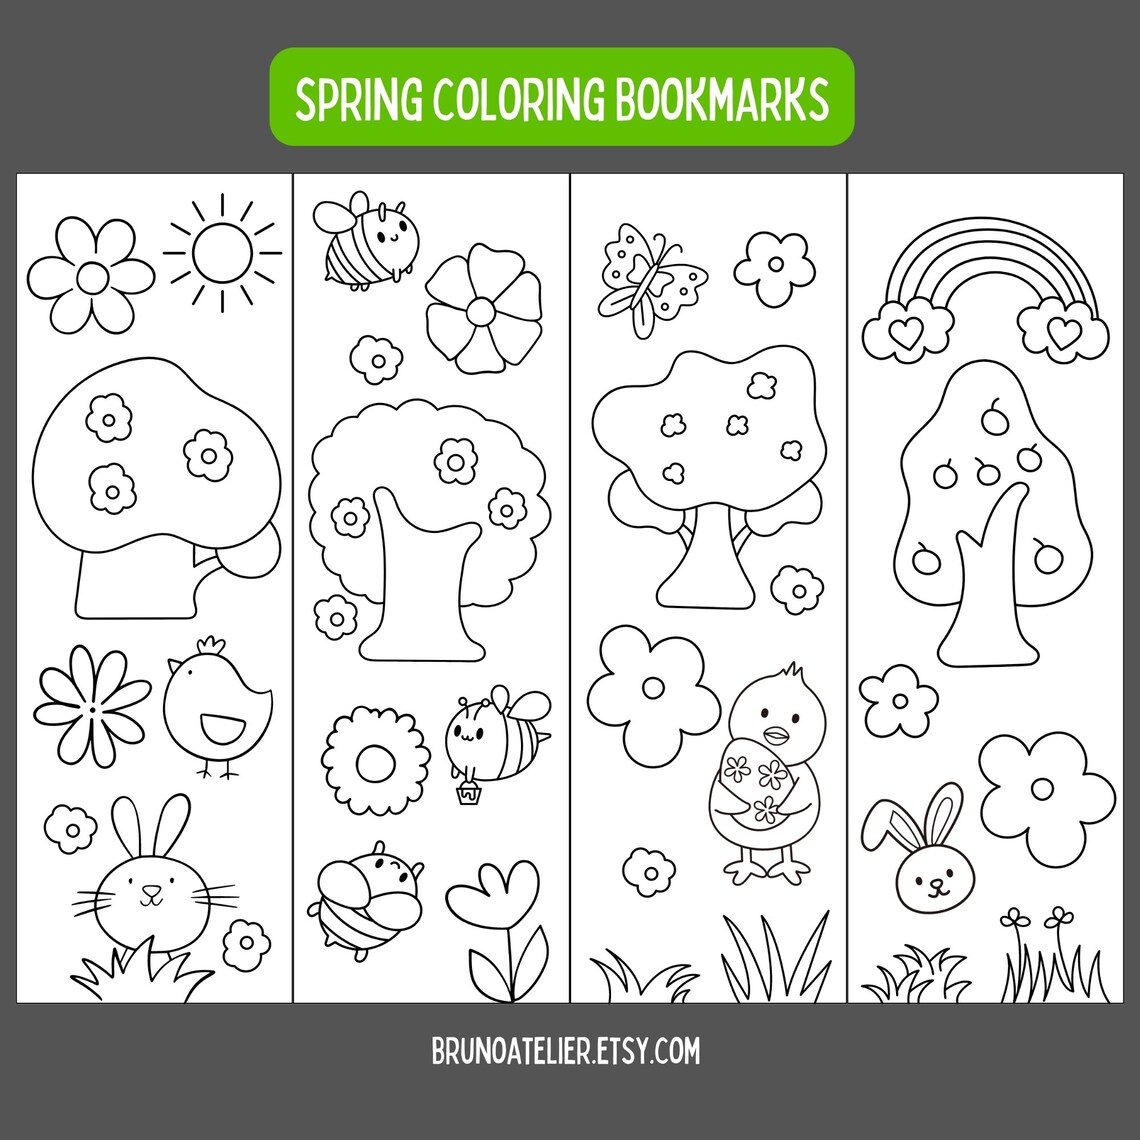 Coloring bookmarks